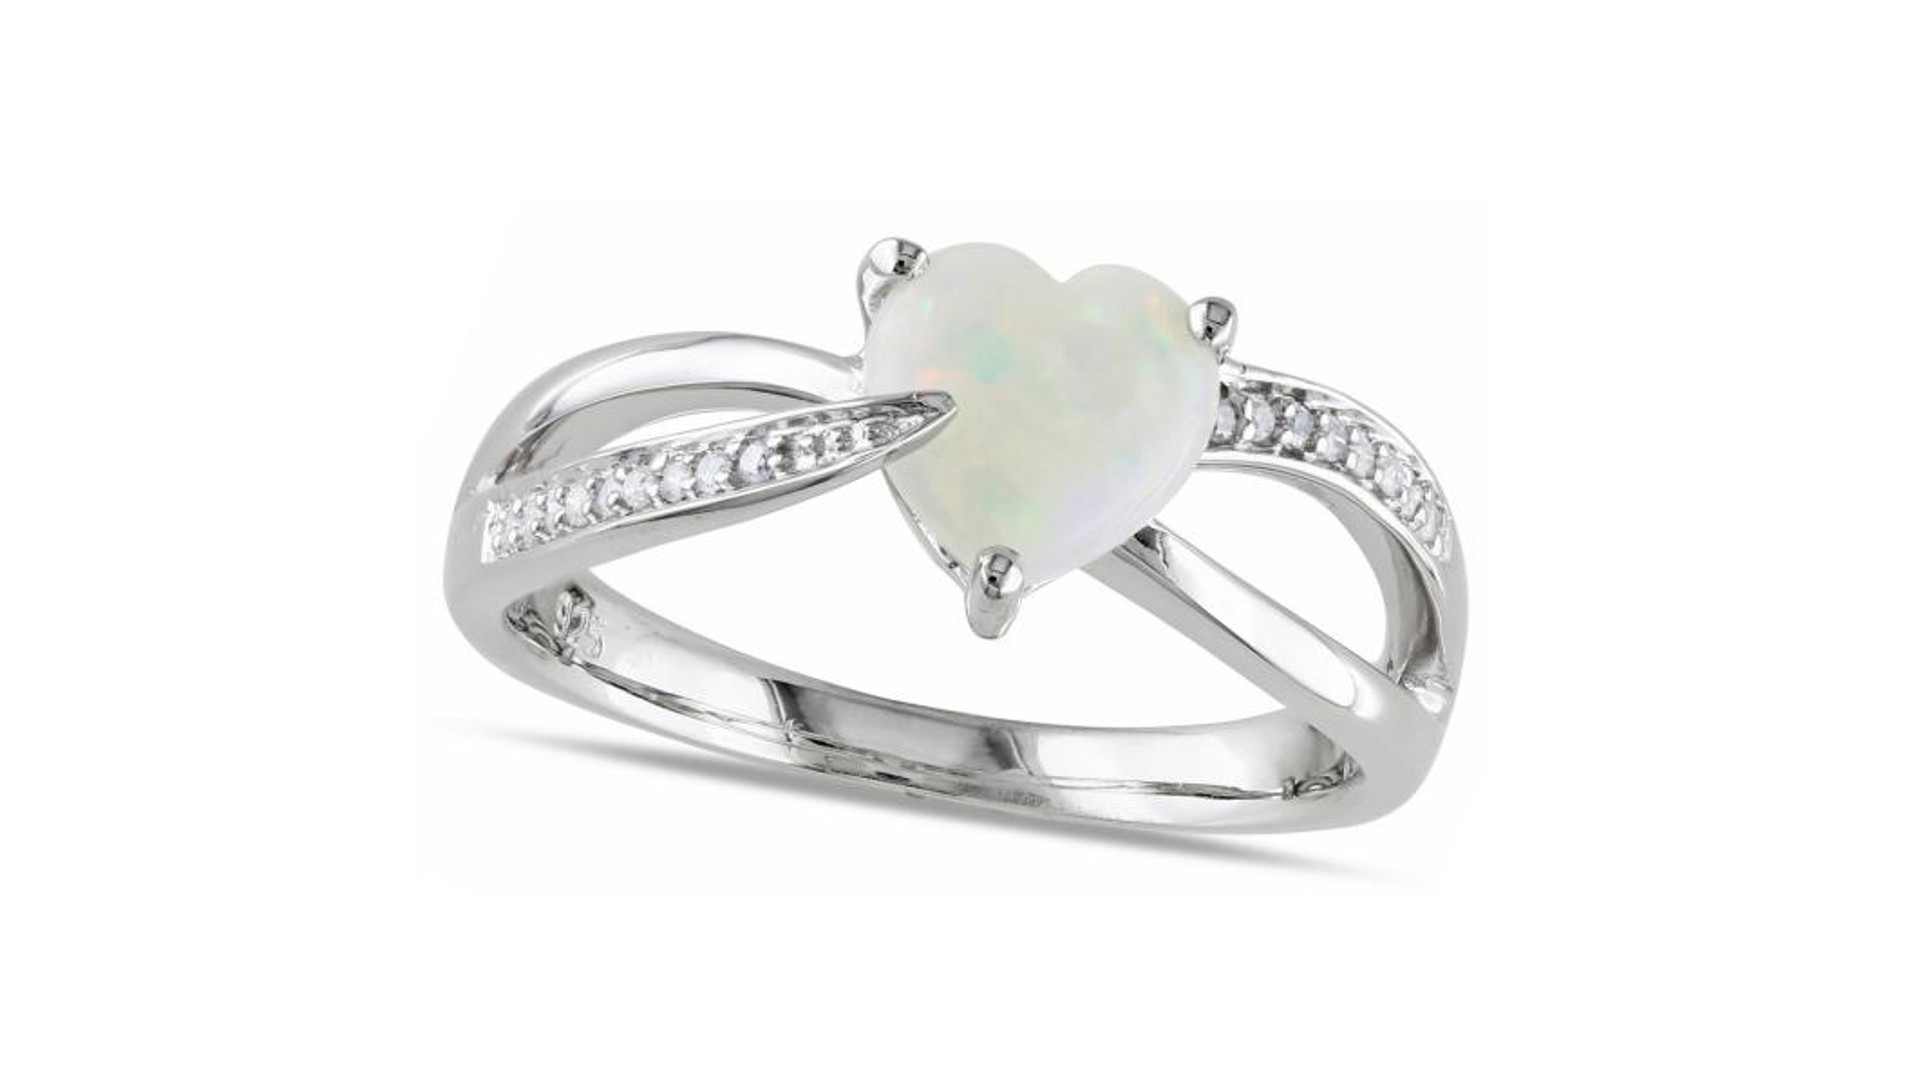 Valentine’s Day Gift Guide: a Heart-Shaped White Opal Solitaire and Diamond Ring